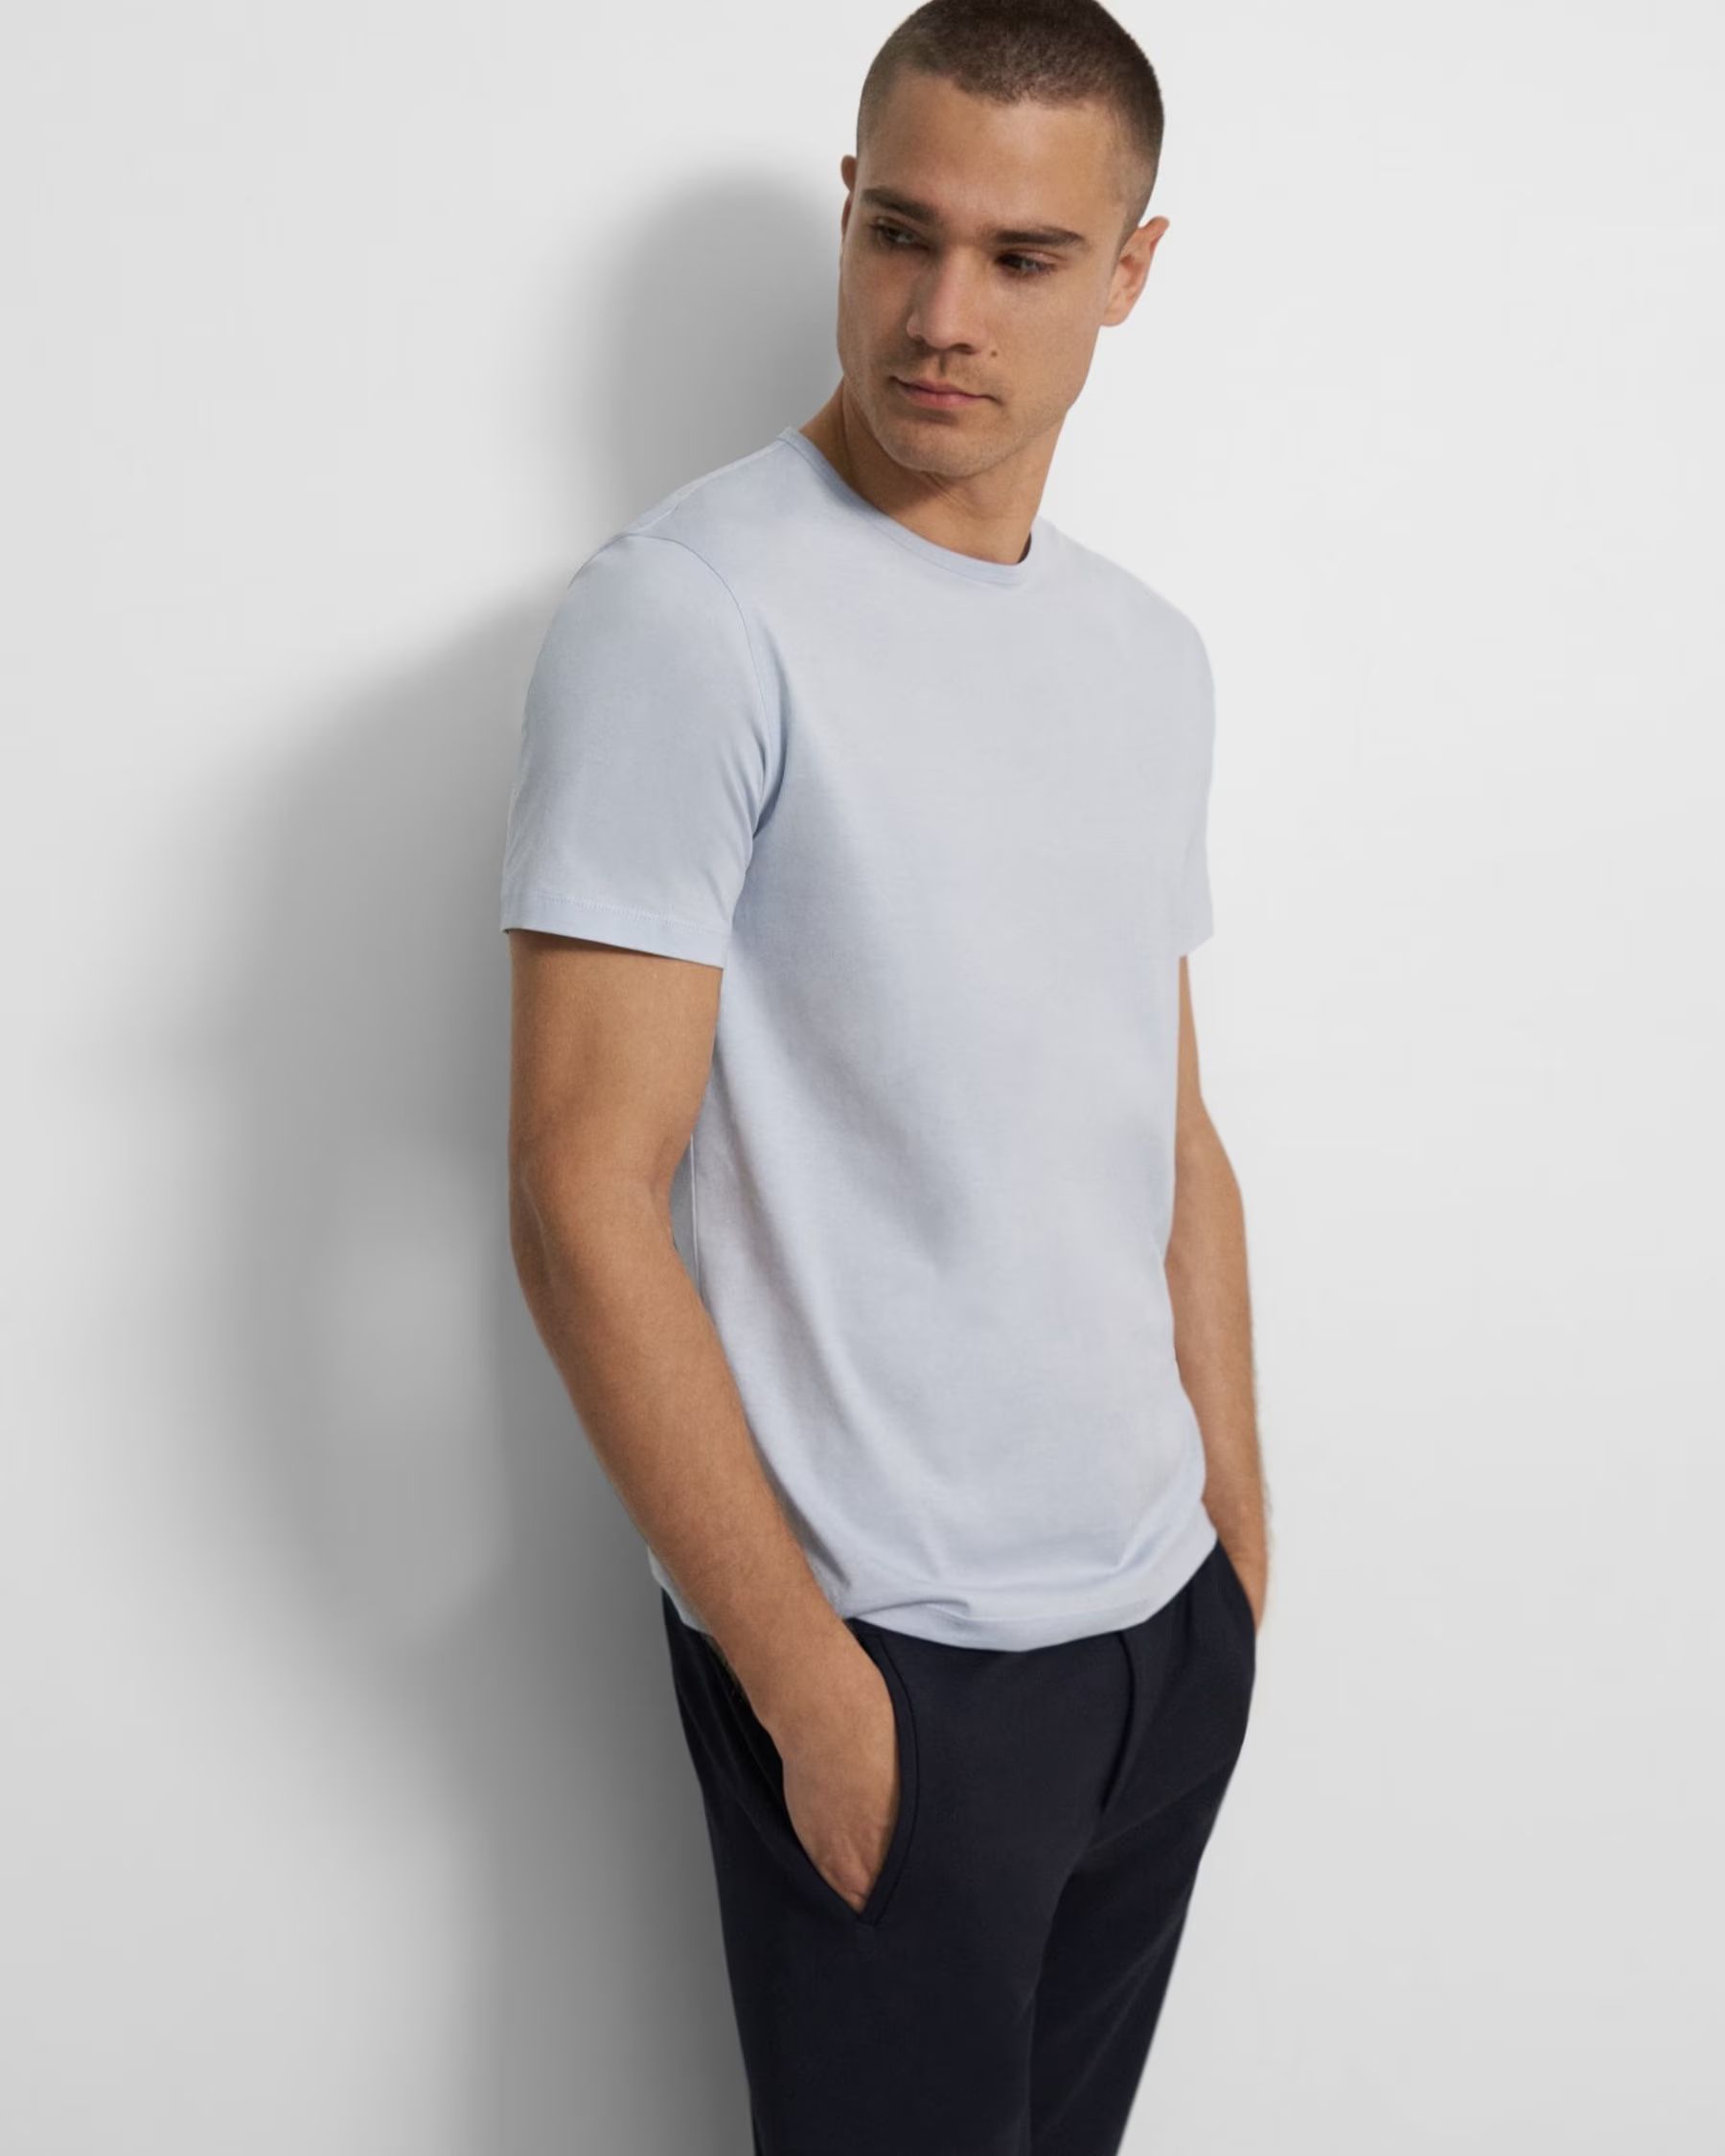 Precise Tee in Luxe Cotton Jersey | Theory